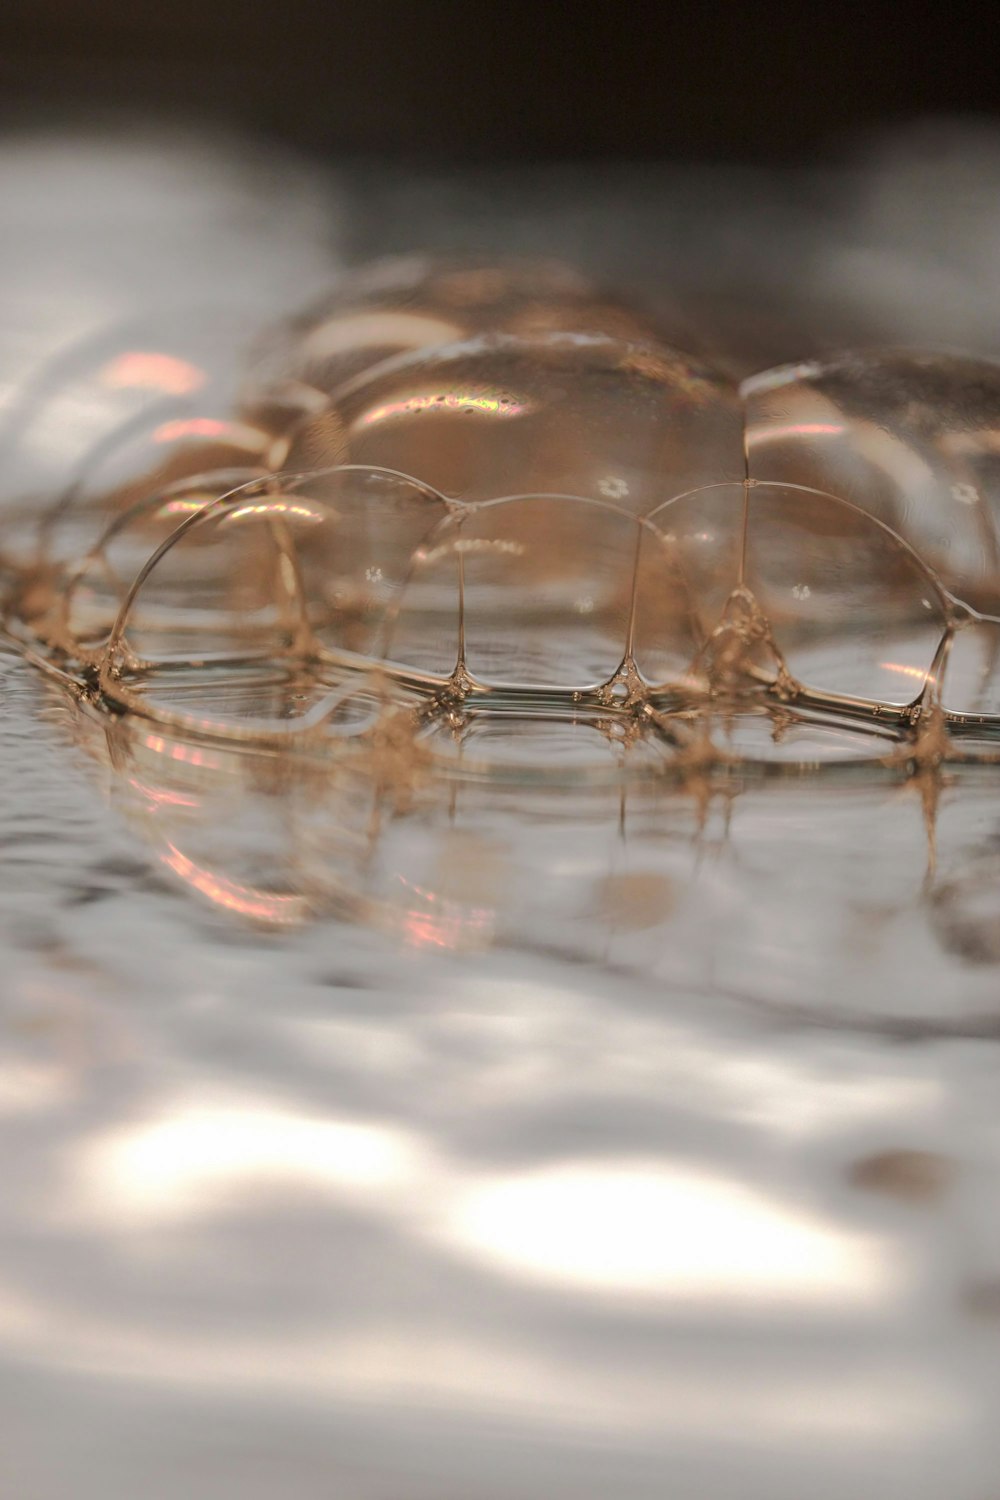 a close up of a water droplet on a surface